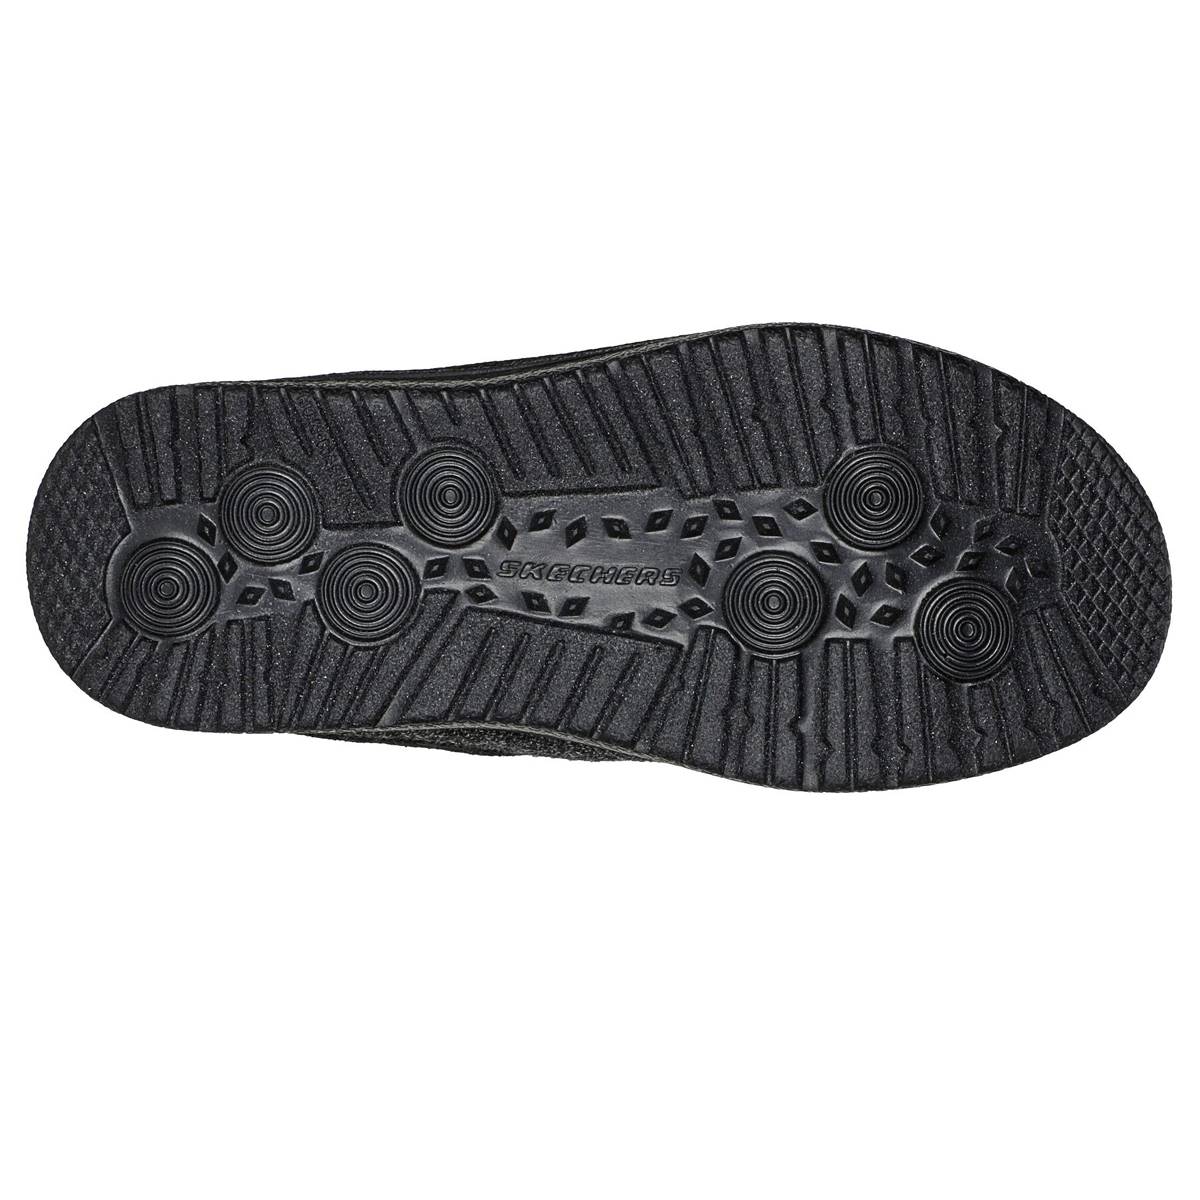 Big Boys Skechers Melson Cozy Cool Slippers